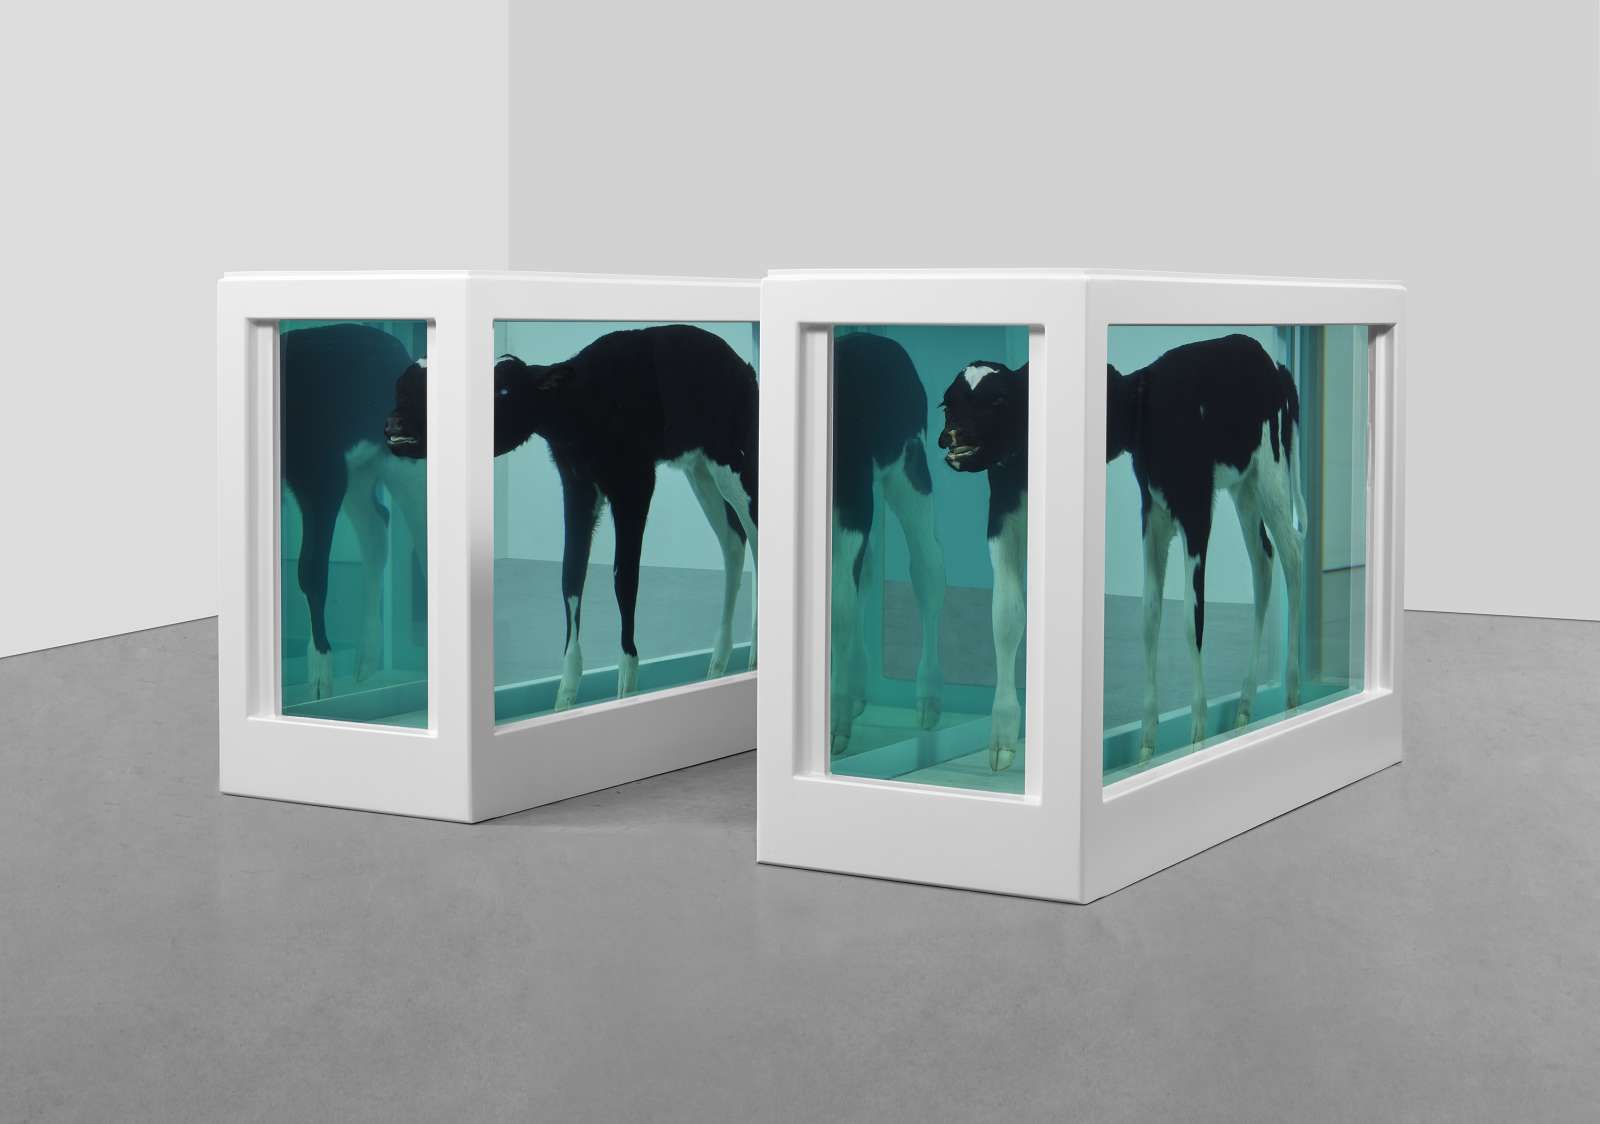 Damien Hirst, Cain and Abel, 1994